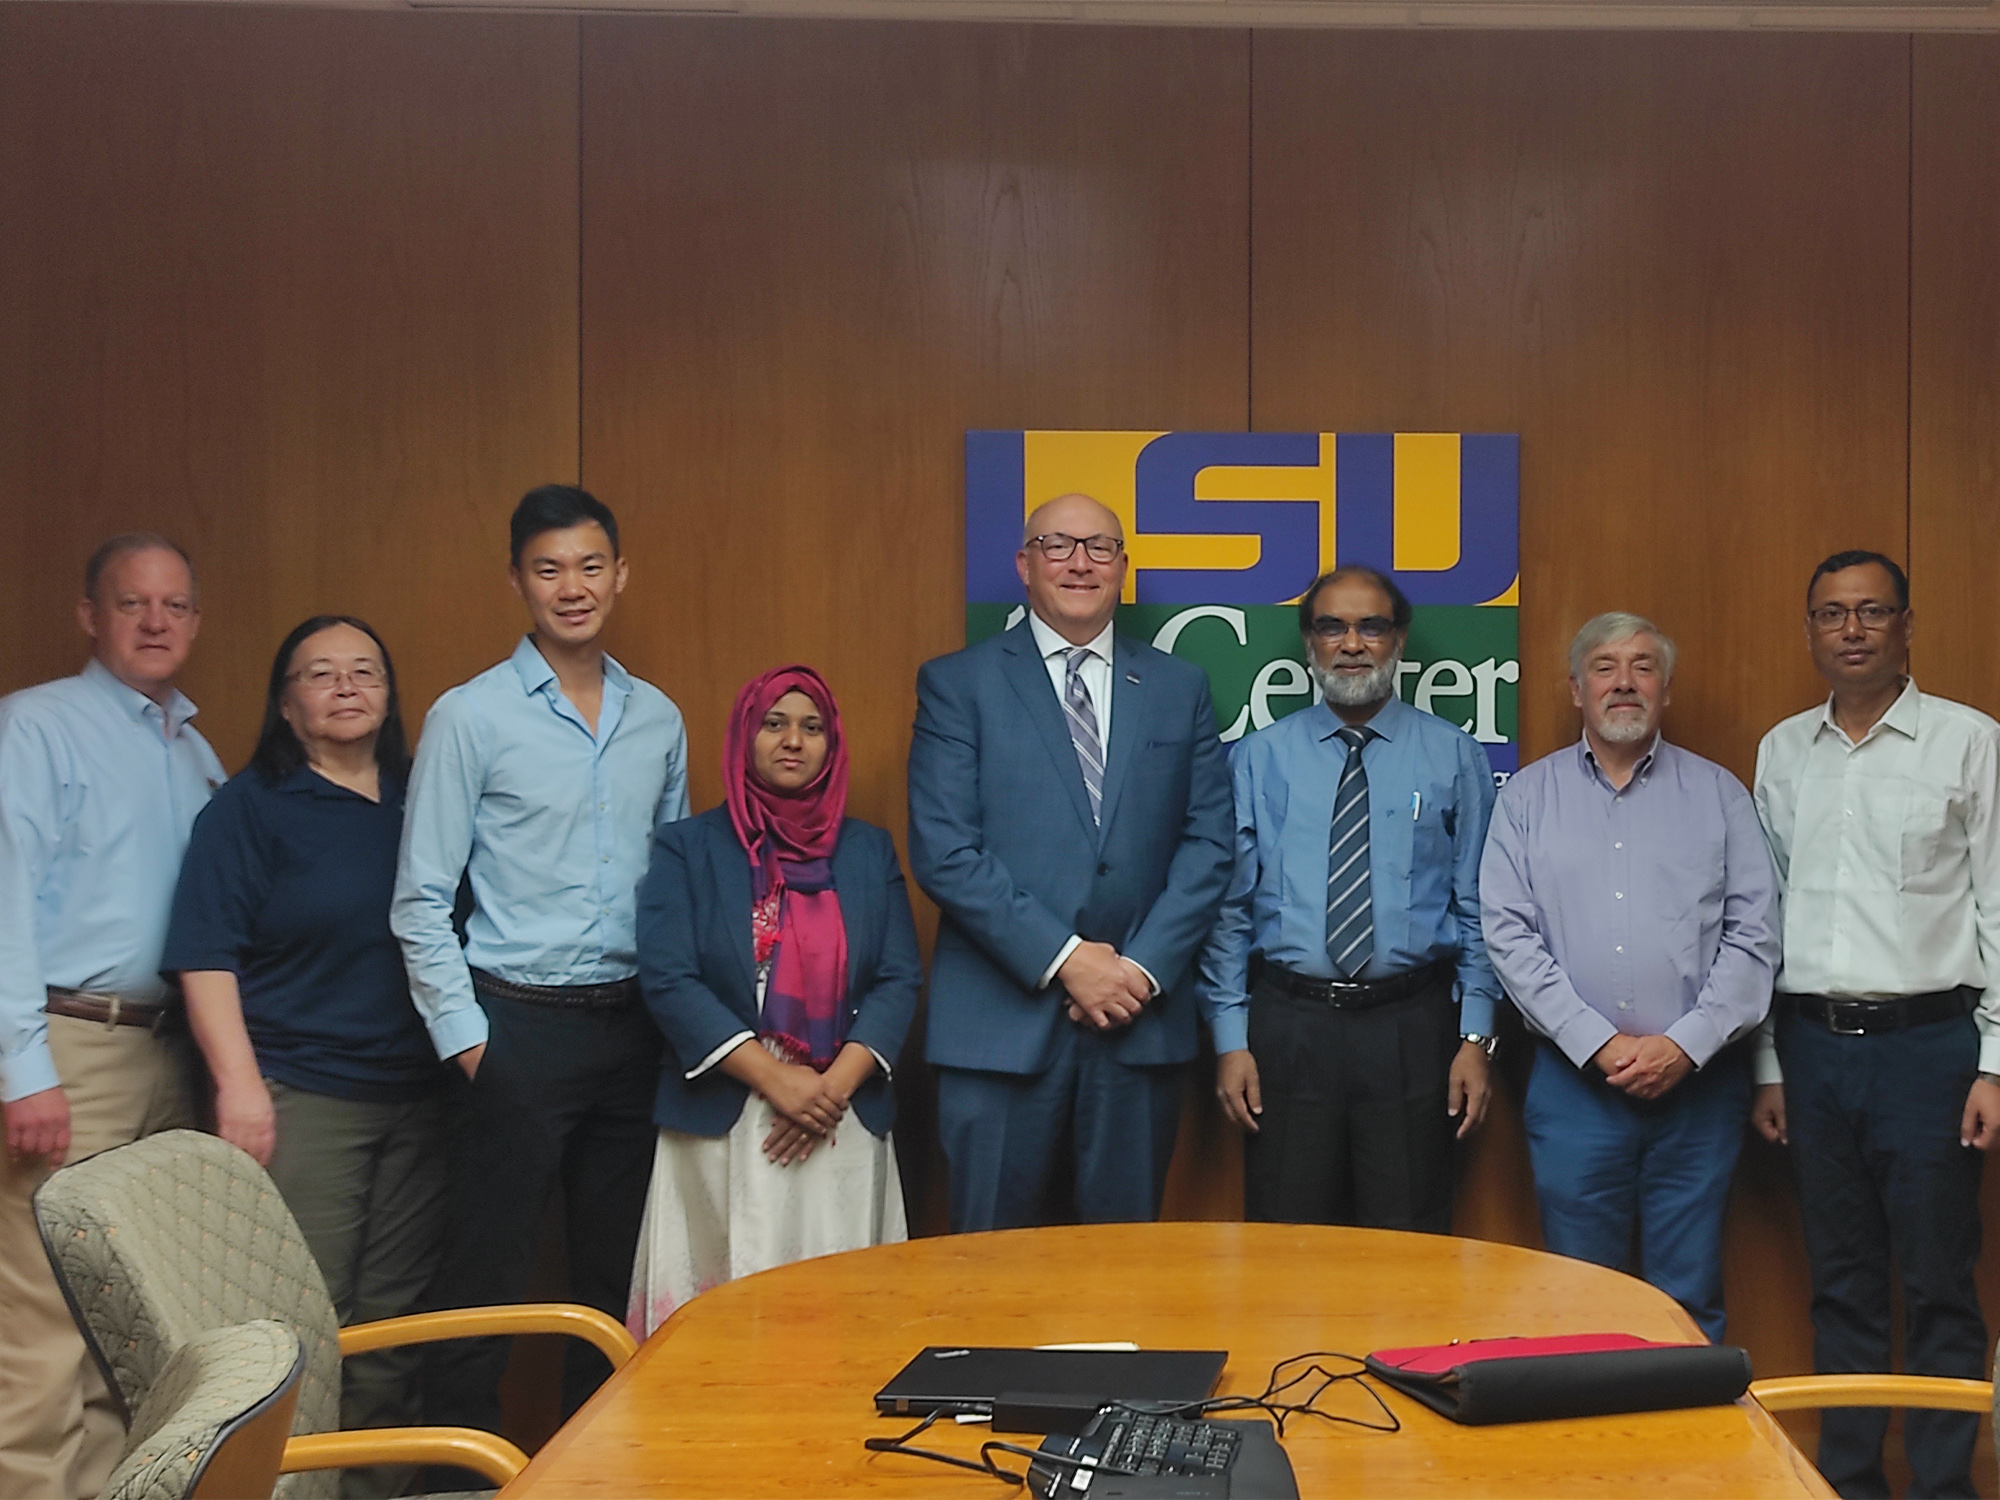 The Fish Innovation Lab team met with the vice president for agriculture and dean of the College of Agriculture, Matt Lee.